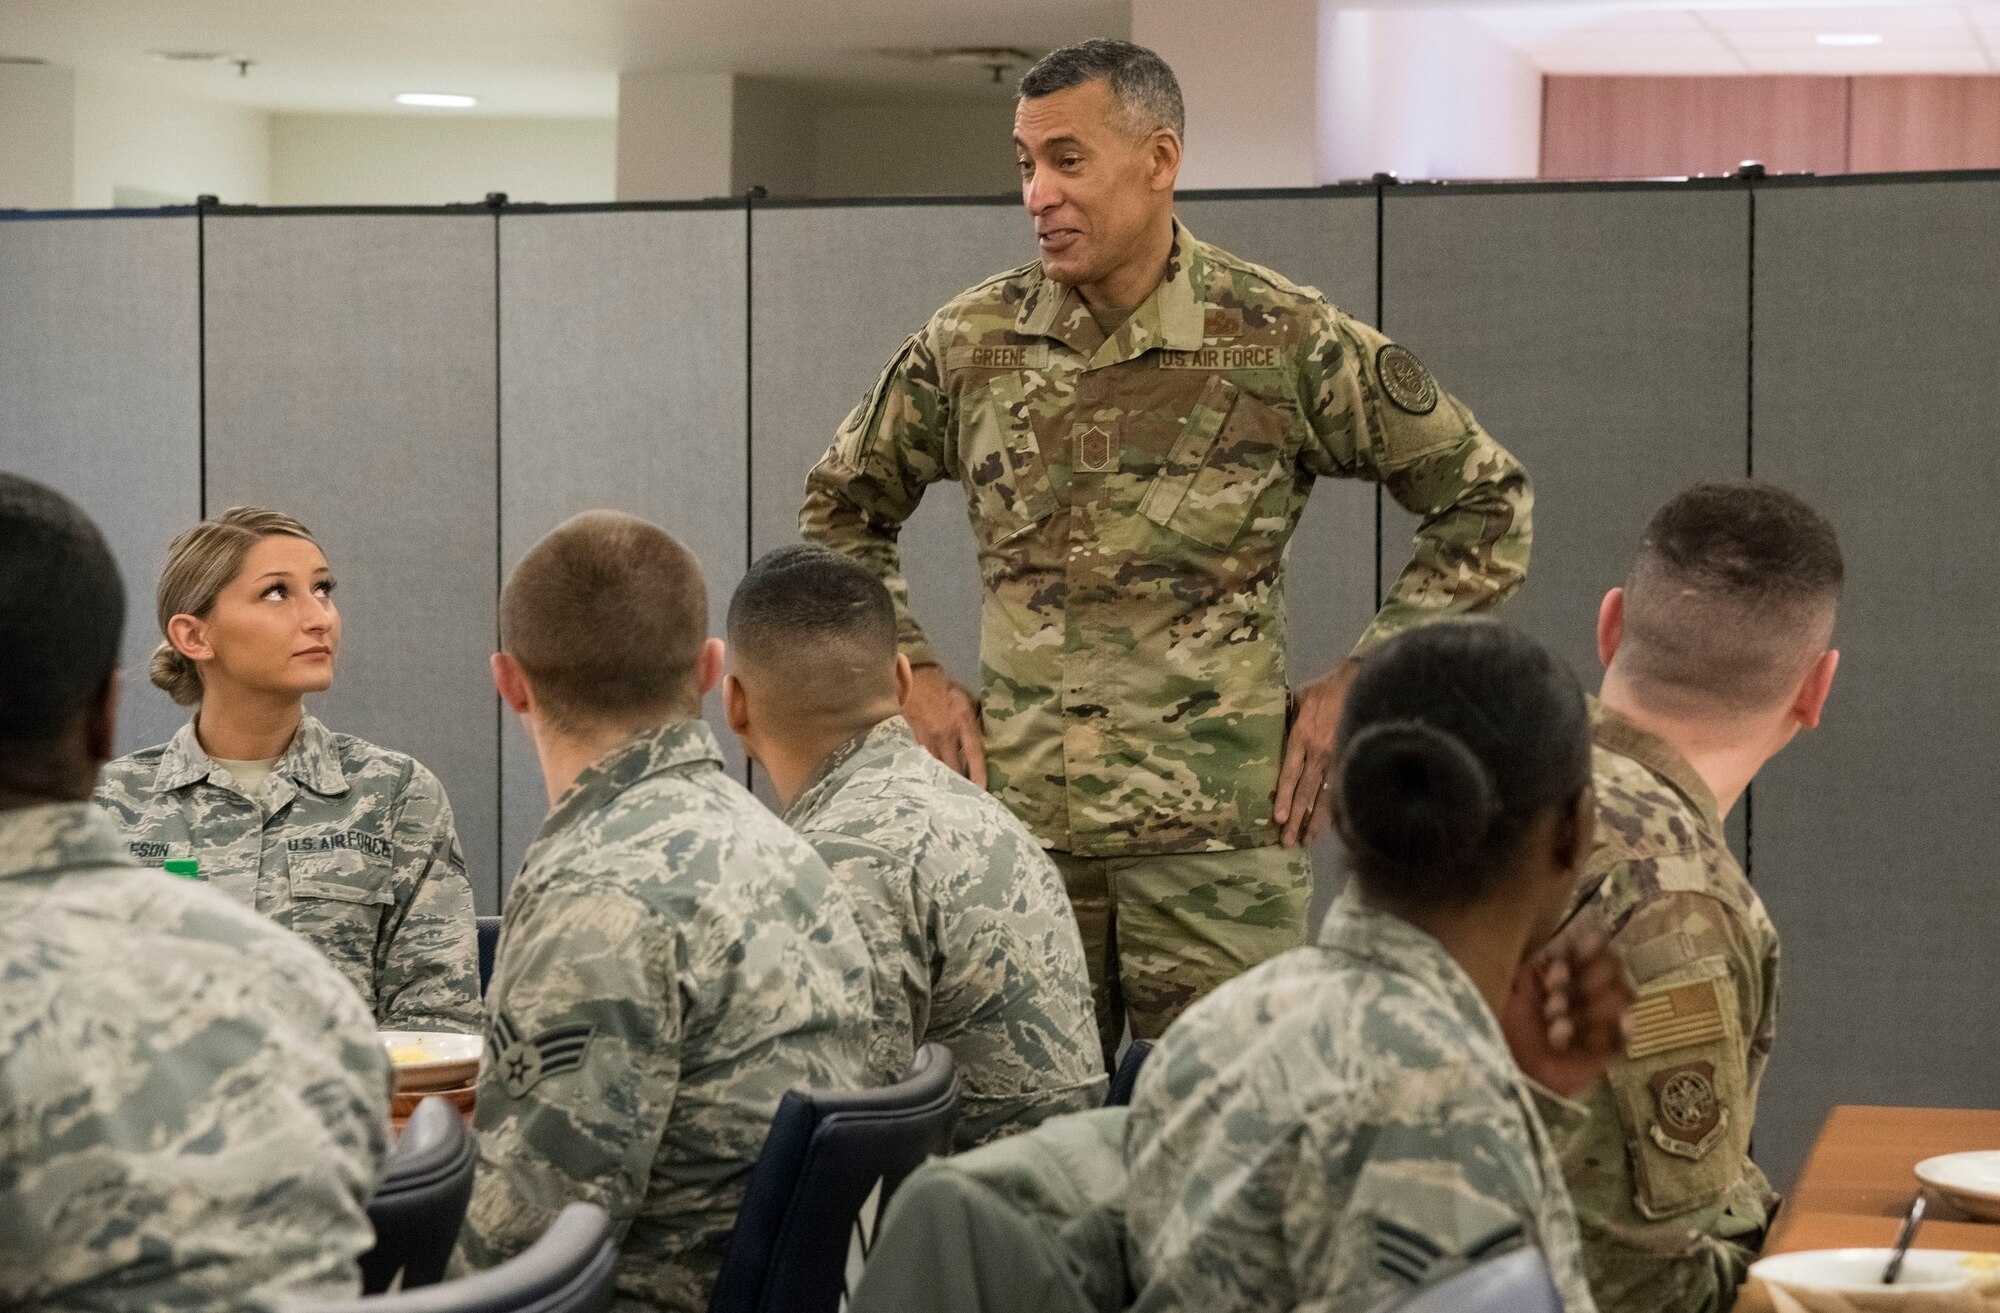 U.S. Air Force Chief Master Sgt. Terrence Greene, command chief of Air Mobility Command, Scott Air Force Base, Ill., speaks to Airmen Feb. 7, 2019, at the Patterson Dining Facility on Dover Air Force Base, Del. Airman 1st Class Tess Burleson (left), 436th Aerospace Medicine Squadron dental assistant, looks at Greene as he speaks to her and other Airmen during breakfast. (U.S. Air Force photo by Roland Balik)